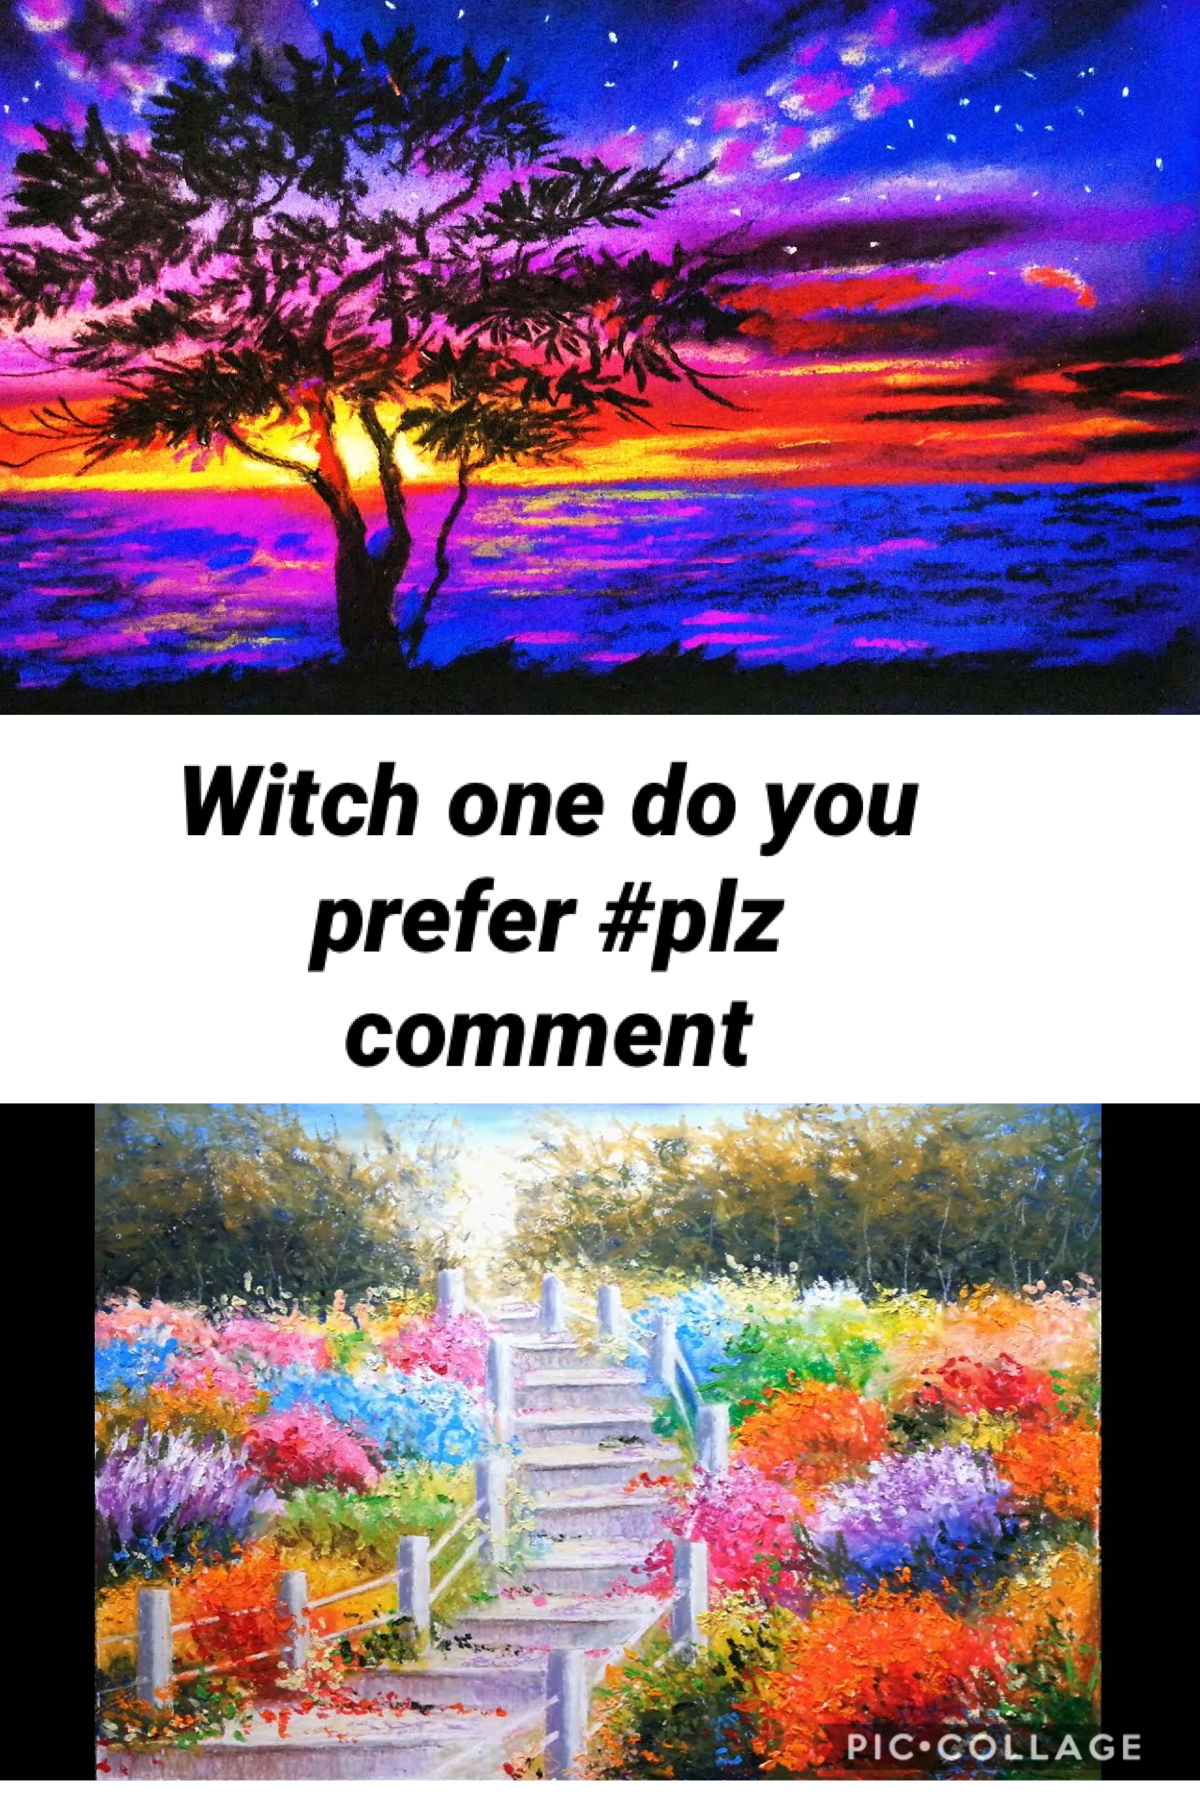 Comment witch one you like best